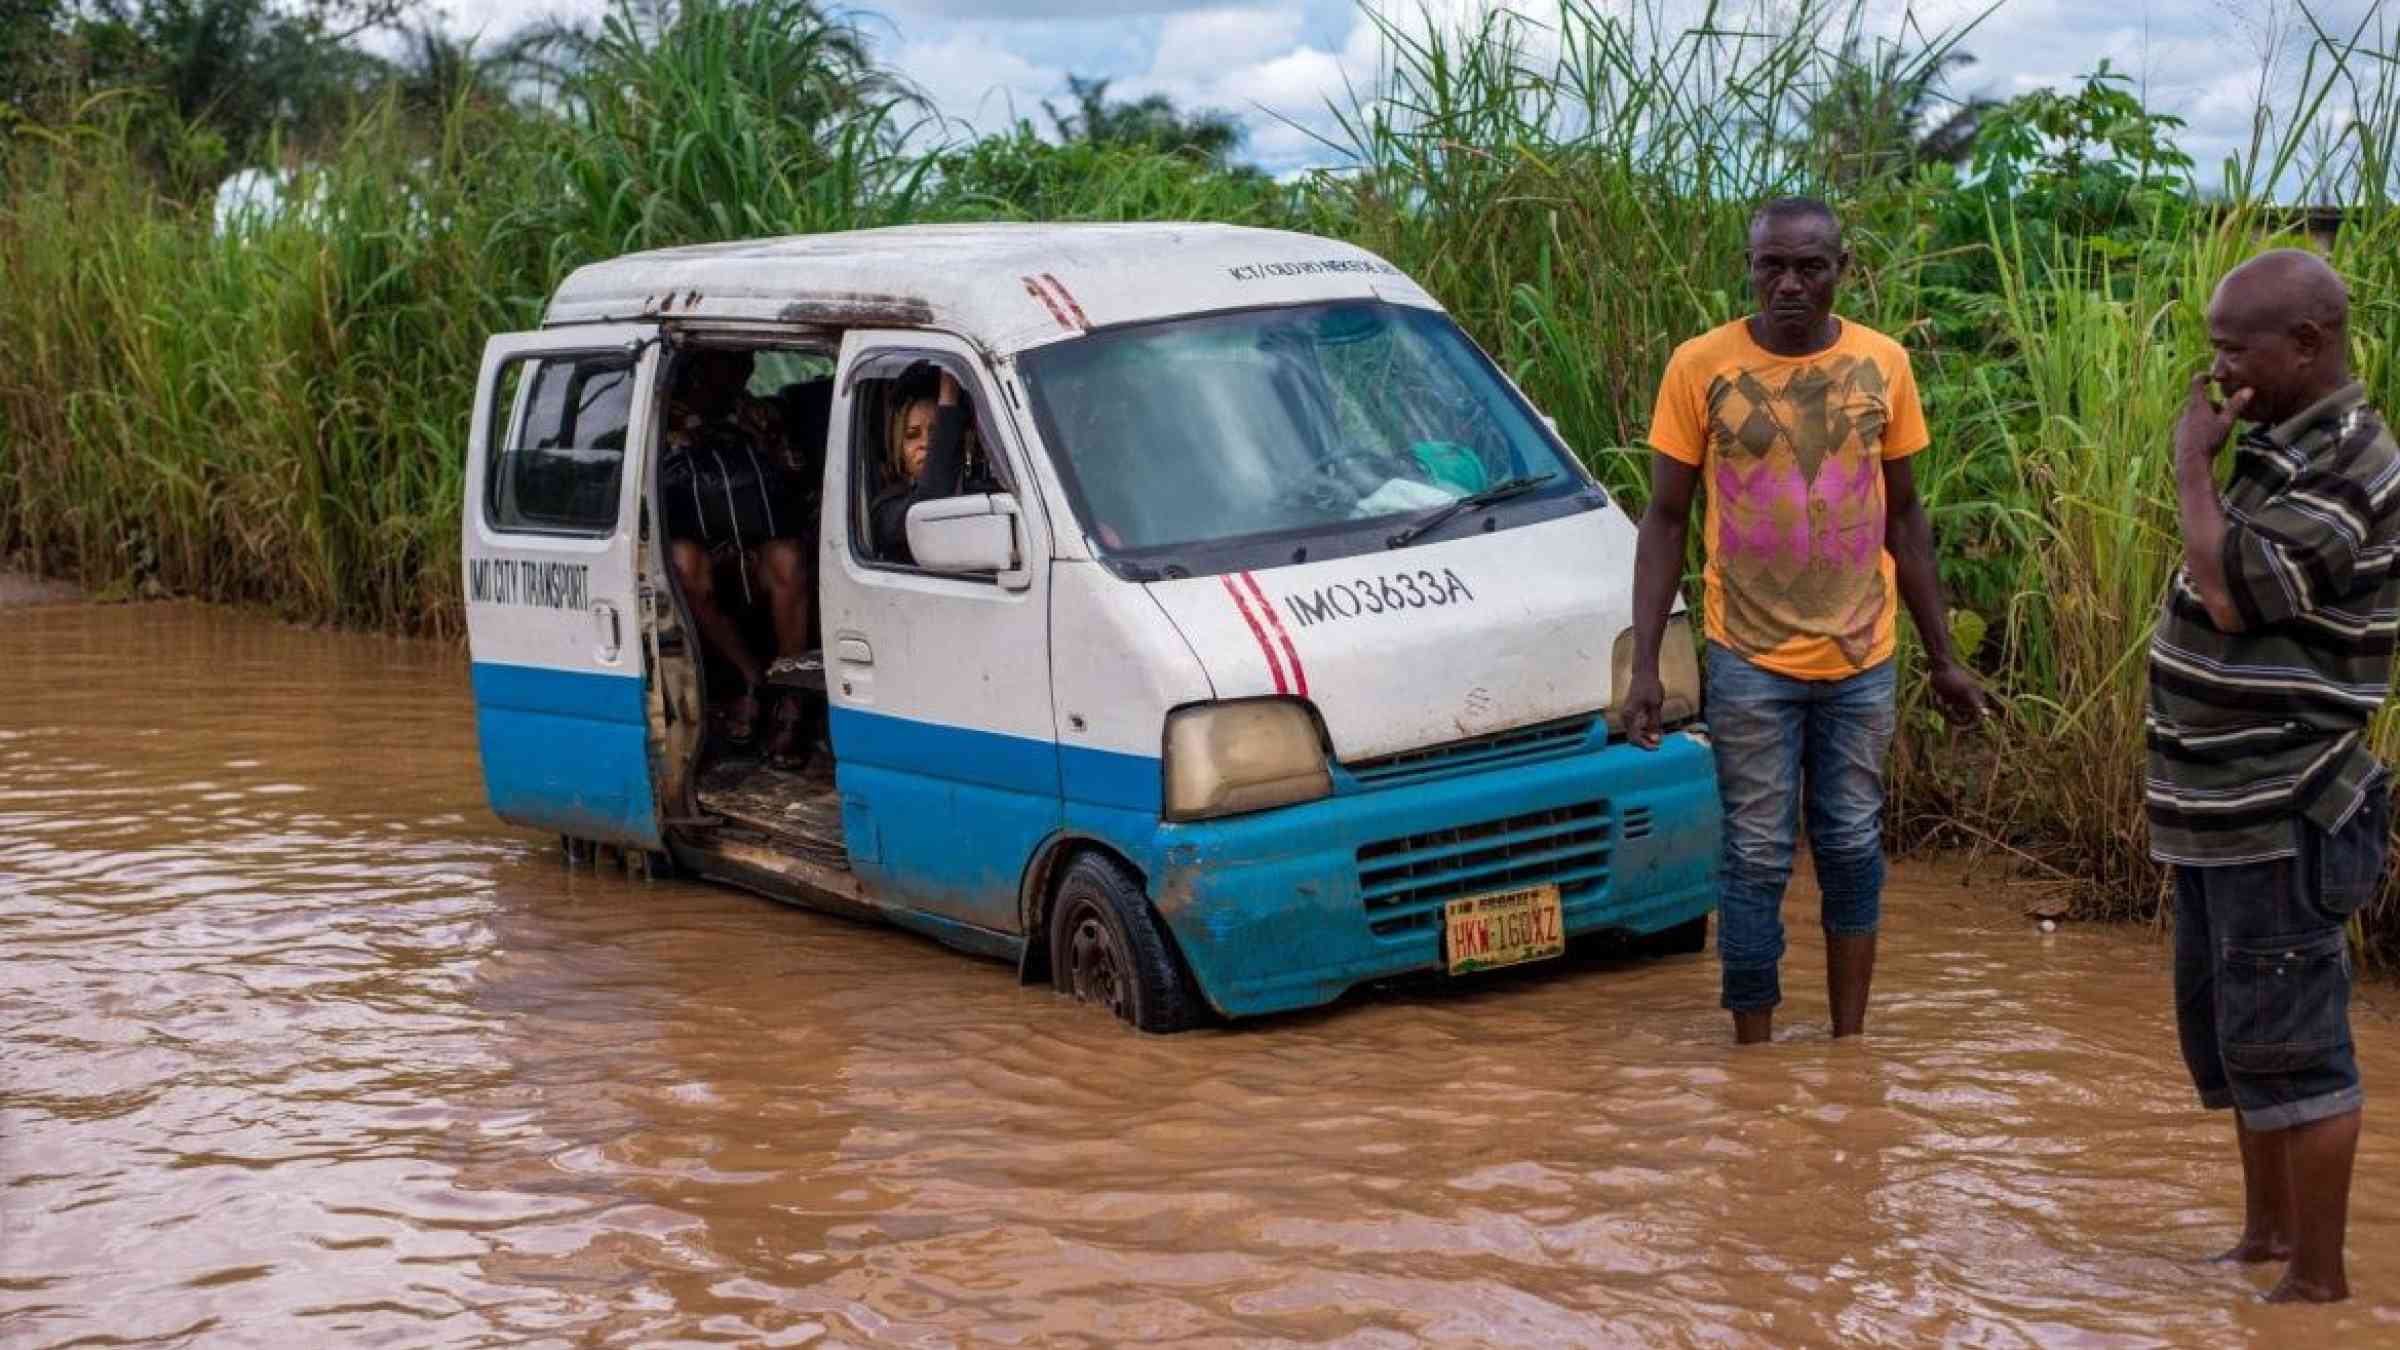 Flooding in southern Nigeria 2022